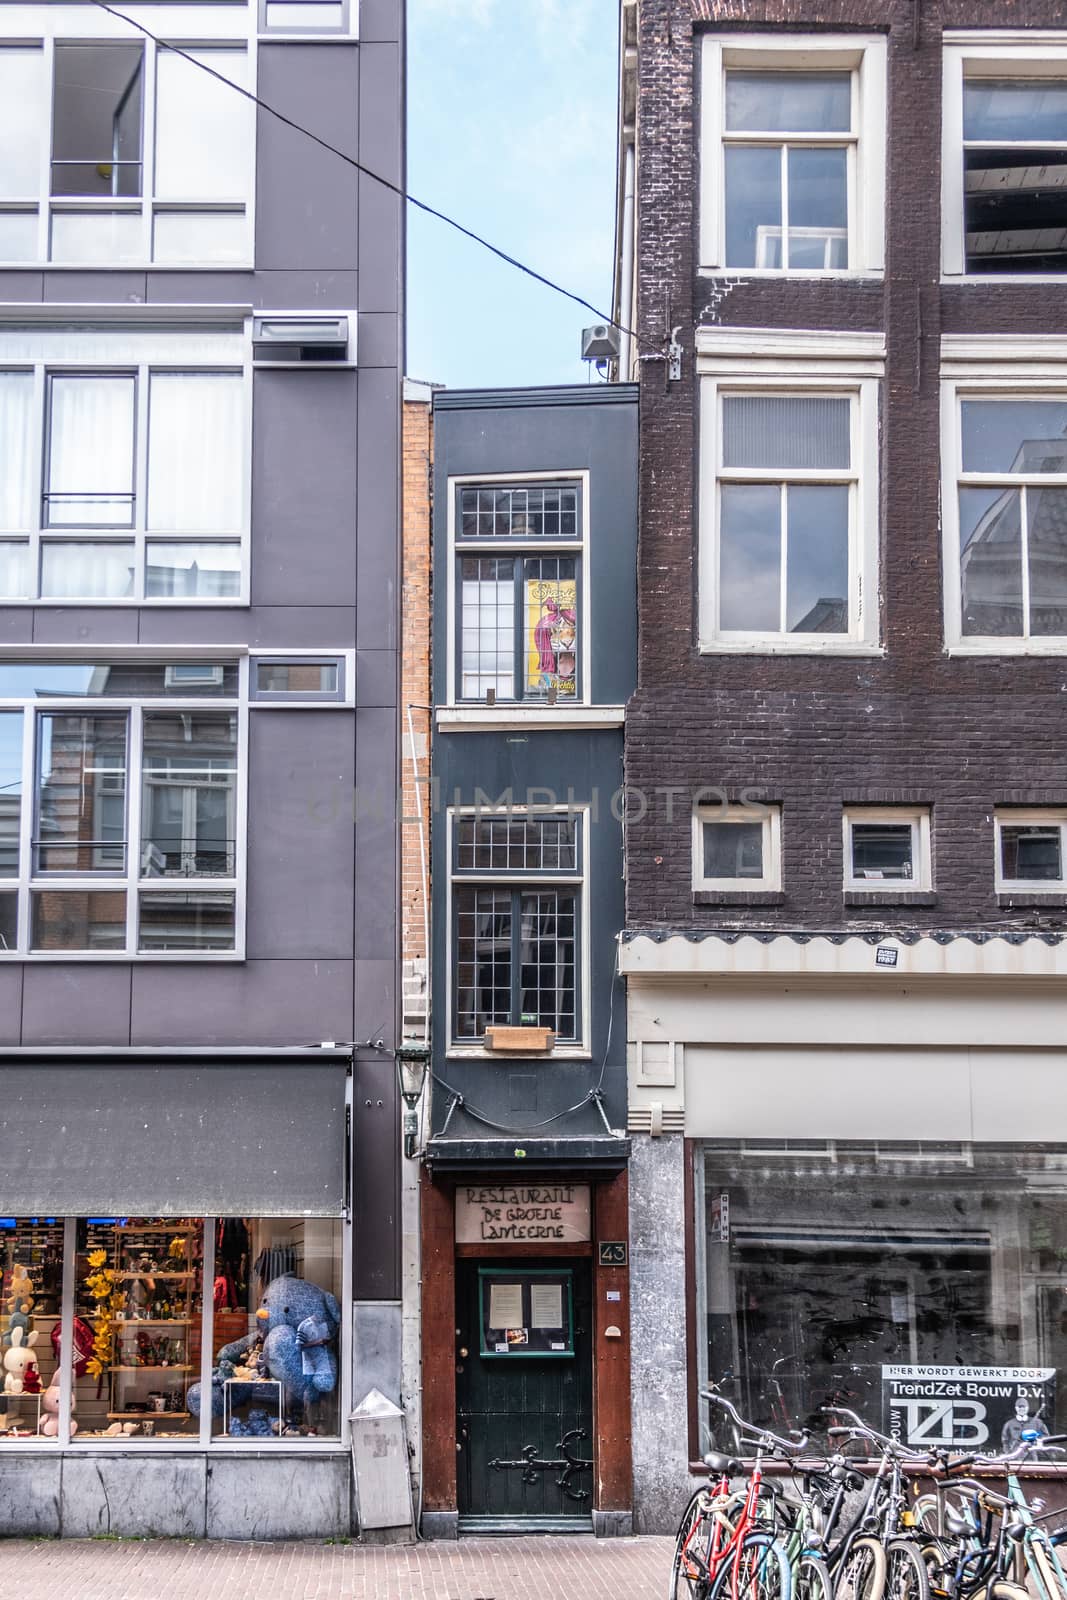 Amsterdam, the Netherlands - June 30, 2019: Smallest house and De Groene Lanteerne restaurant in Haarlemmerstraat squeezed between two other retail business buildings.